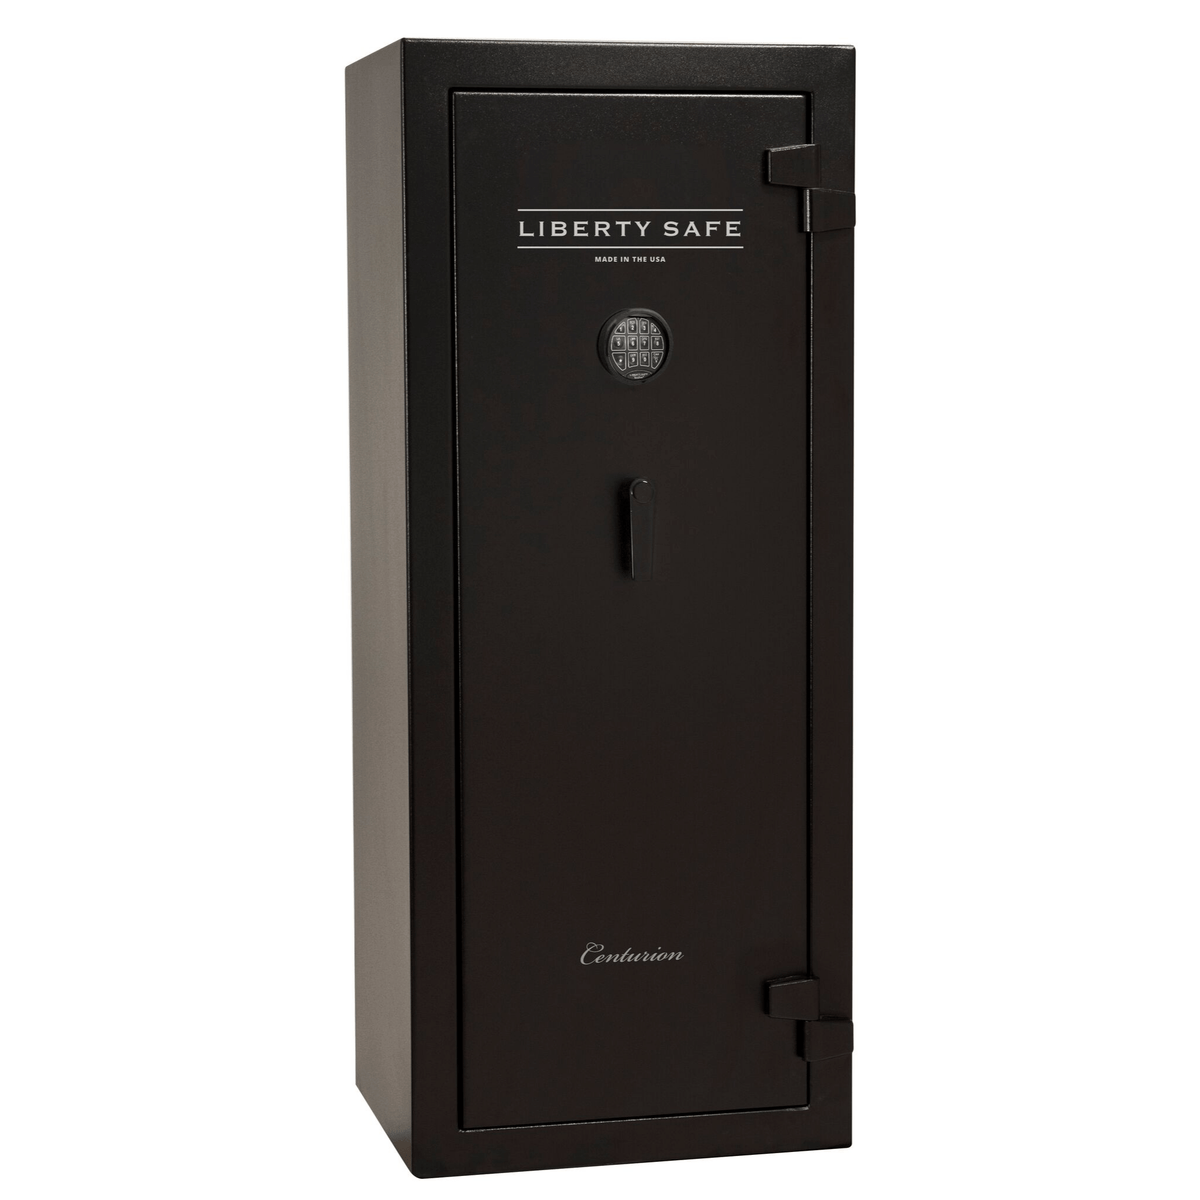 Centurion series | level 1 security | 30 minute fire protection - economy-priced  - MODLOCK